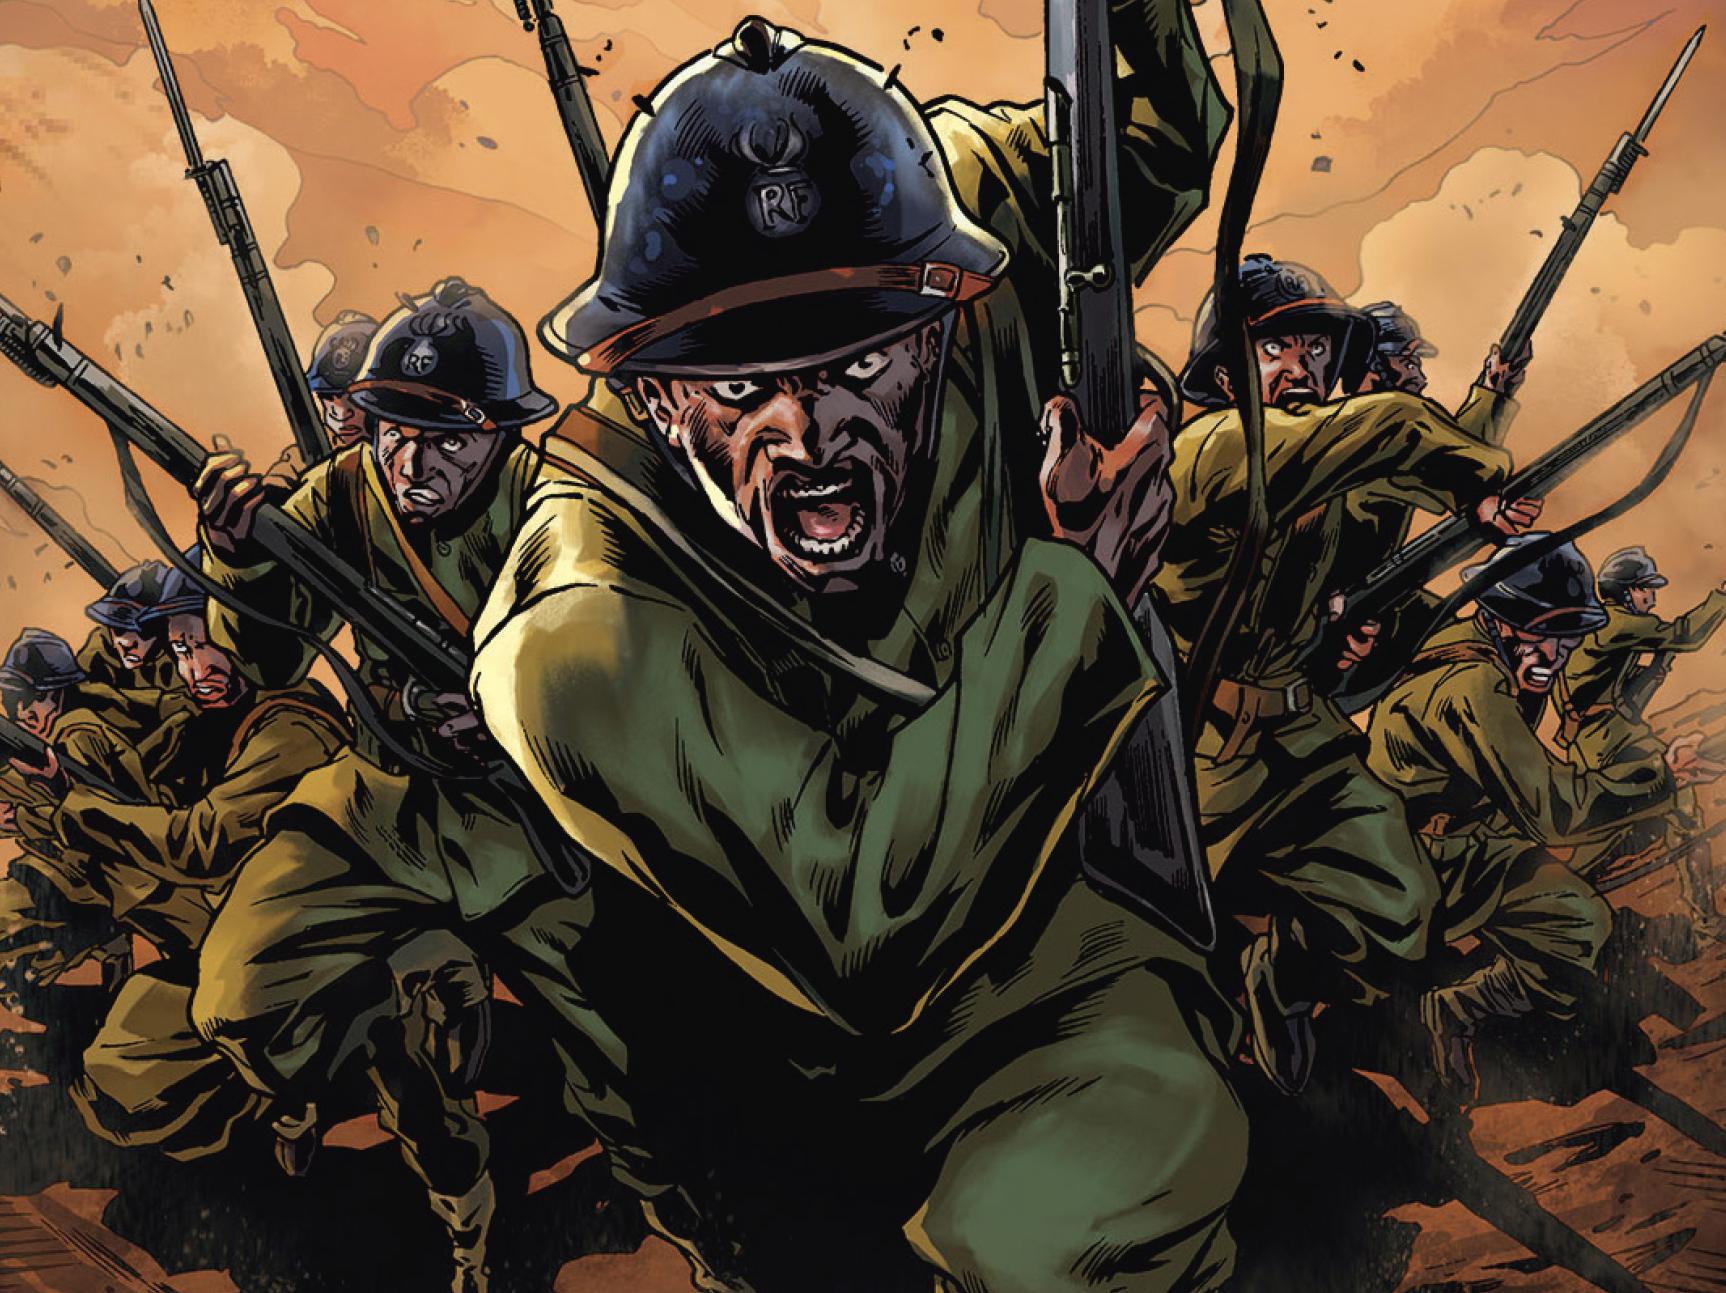 the harlem hellfighters graphic novel